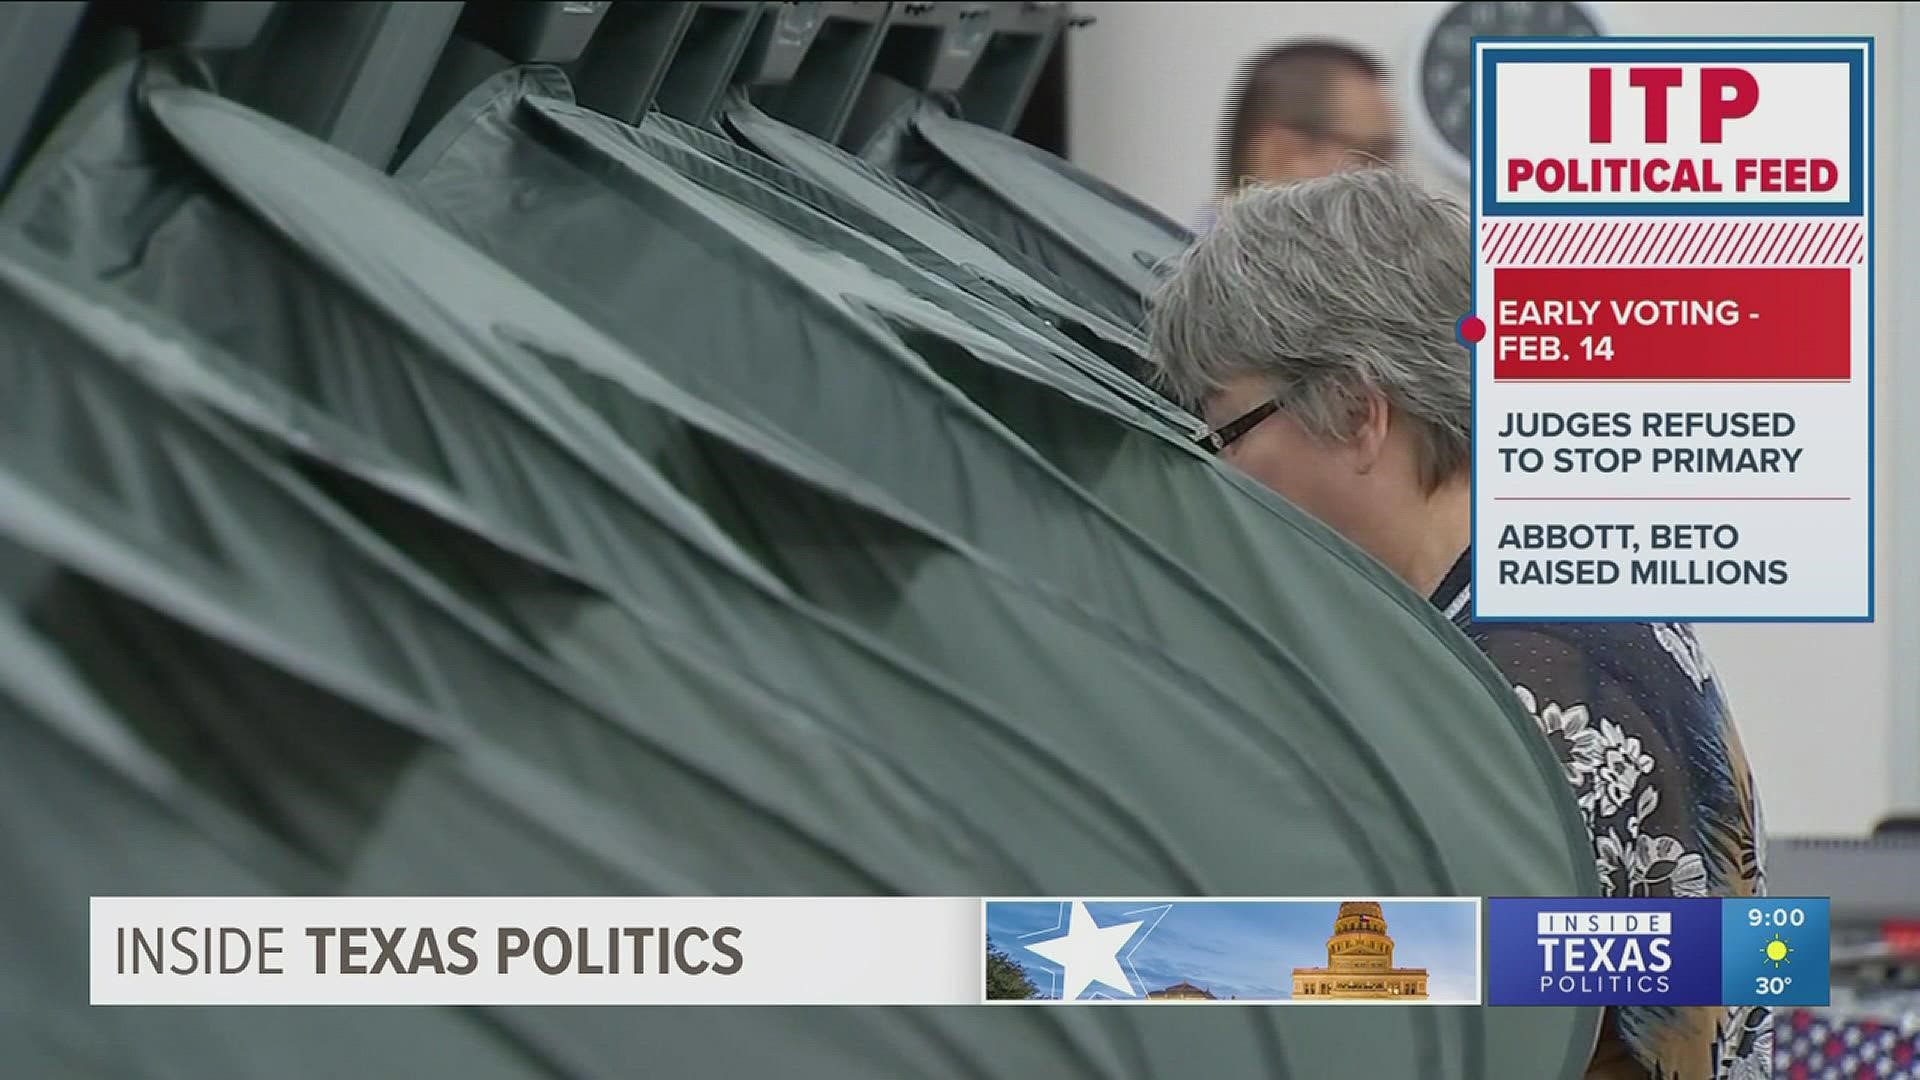 Texans will go to the polls on March 1.